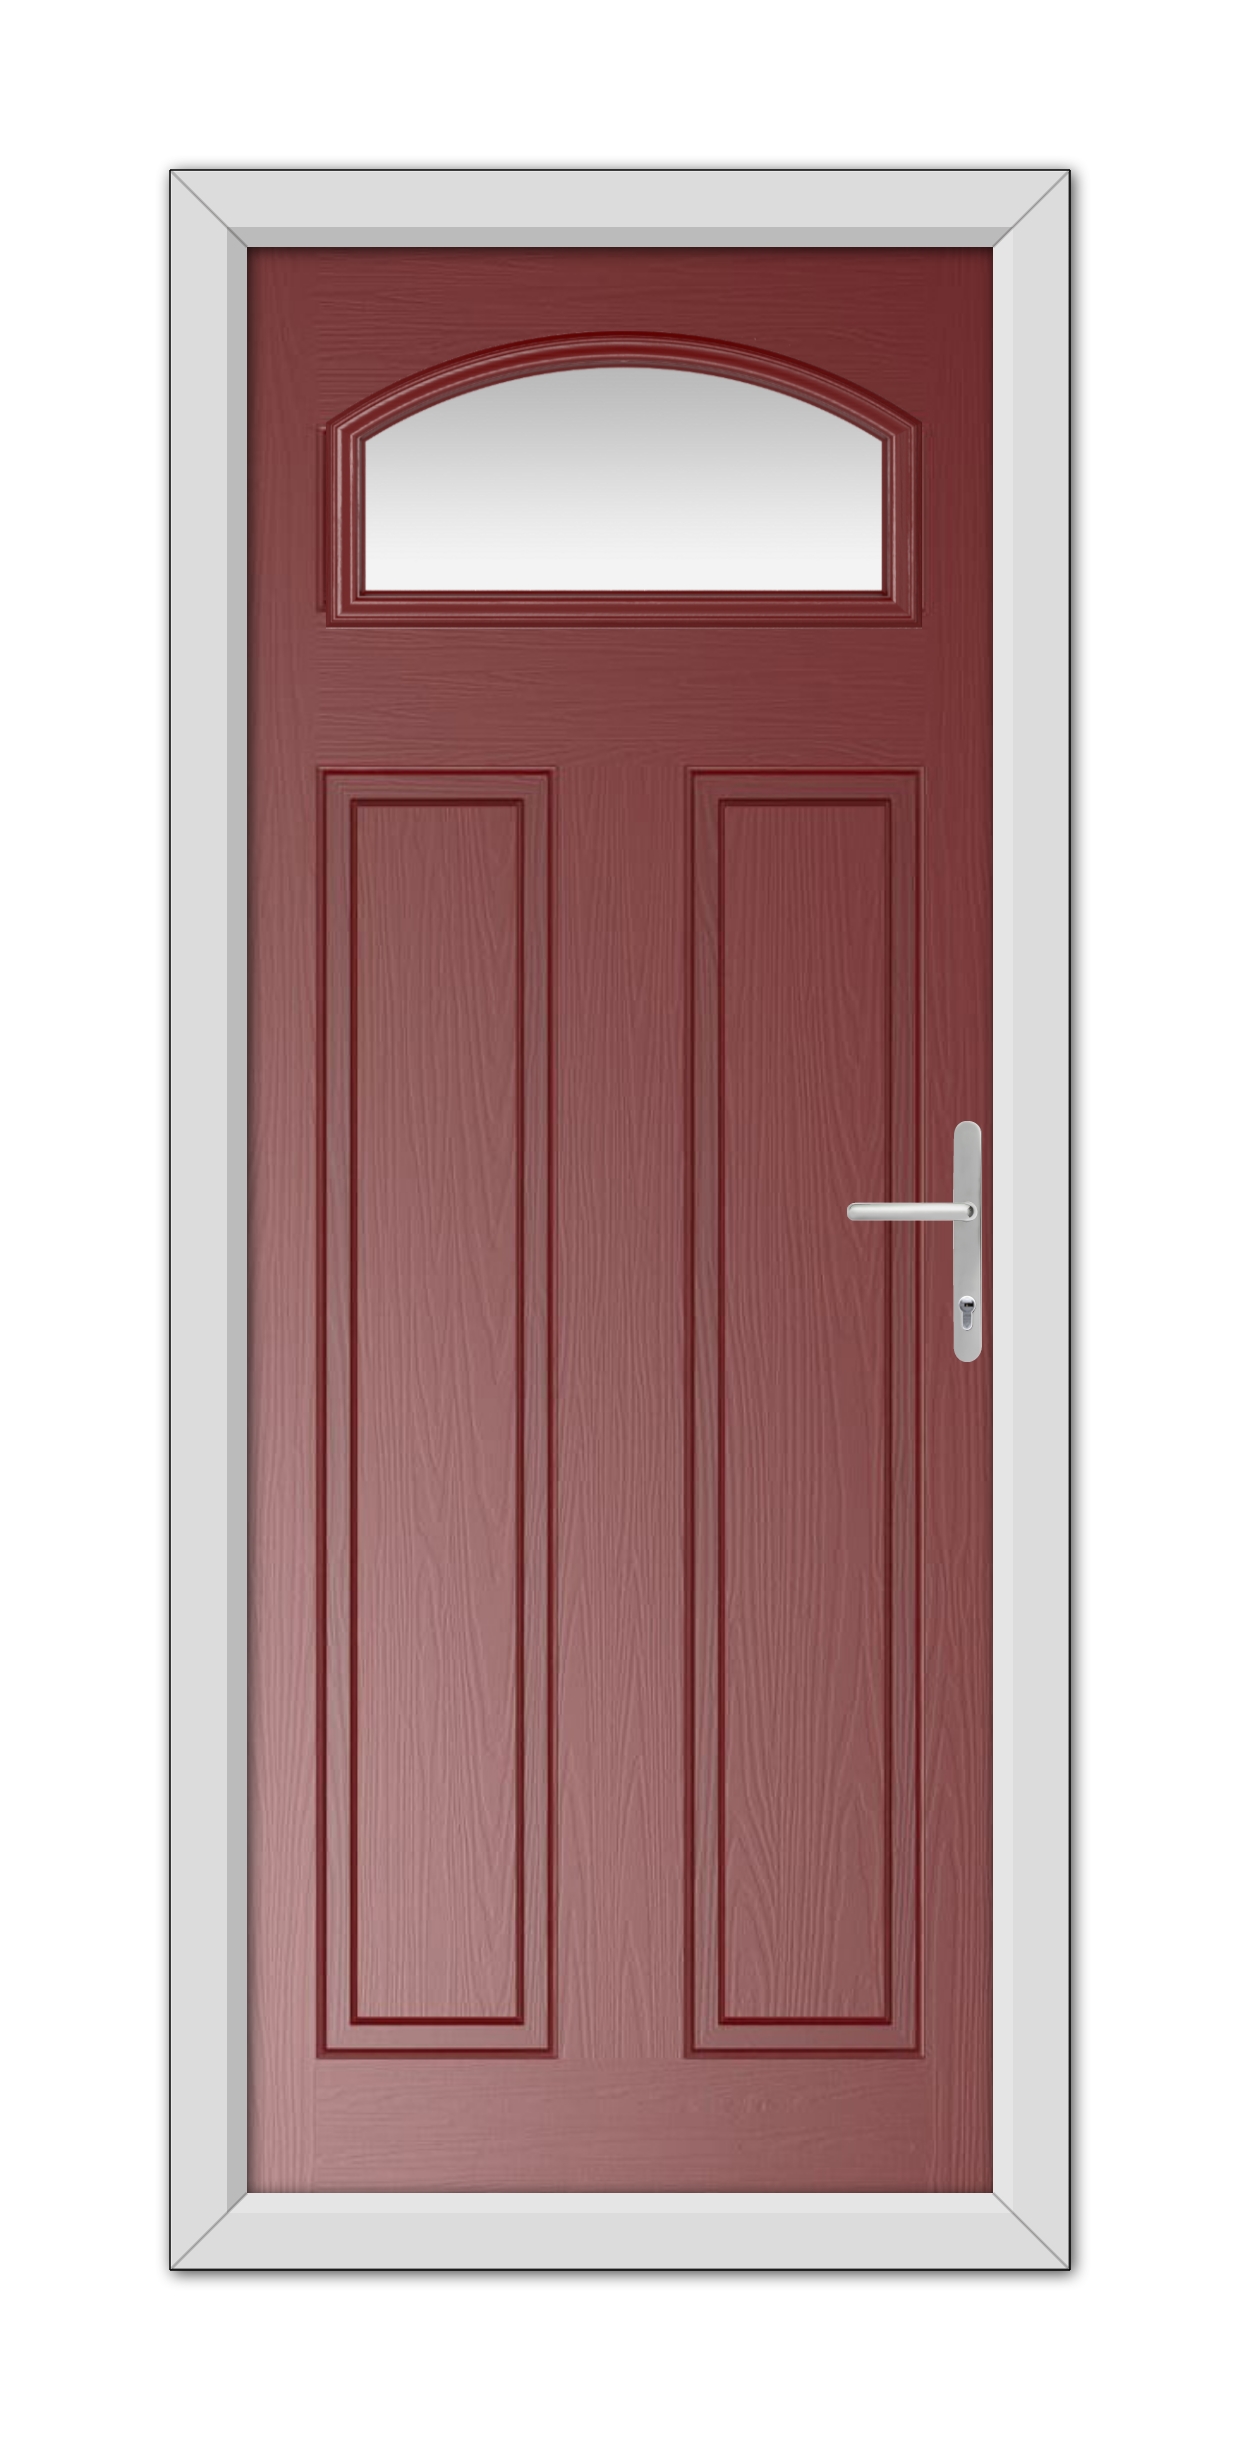 A Red Harlington Composite Door 48mm Timber Core with a semi-circular window at the top and a white handle, set in a white frame.